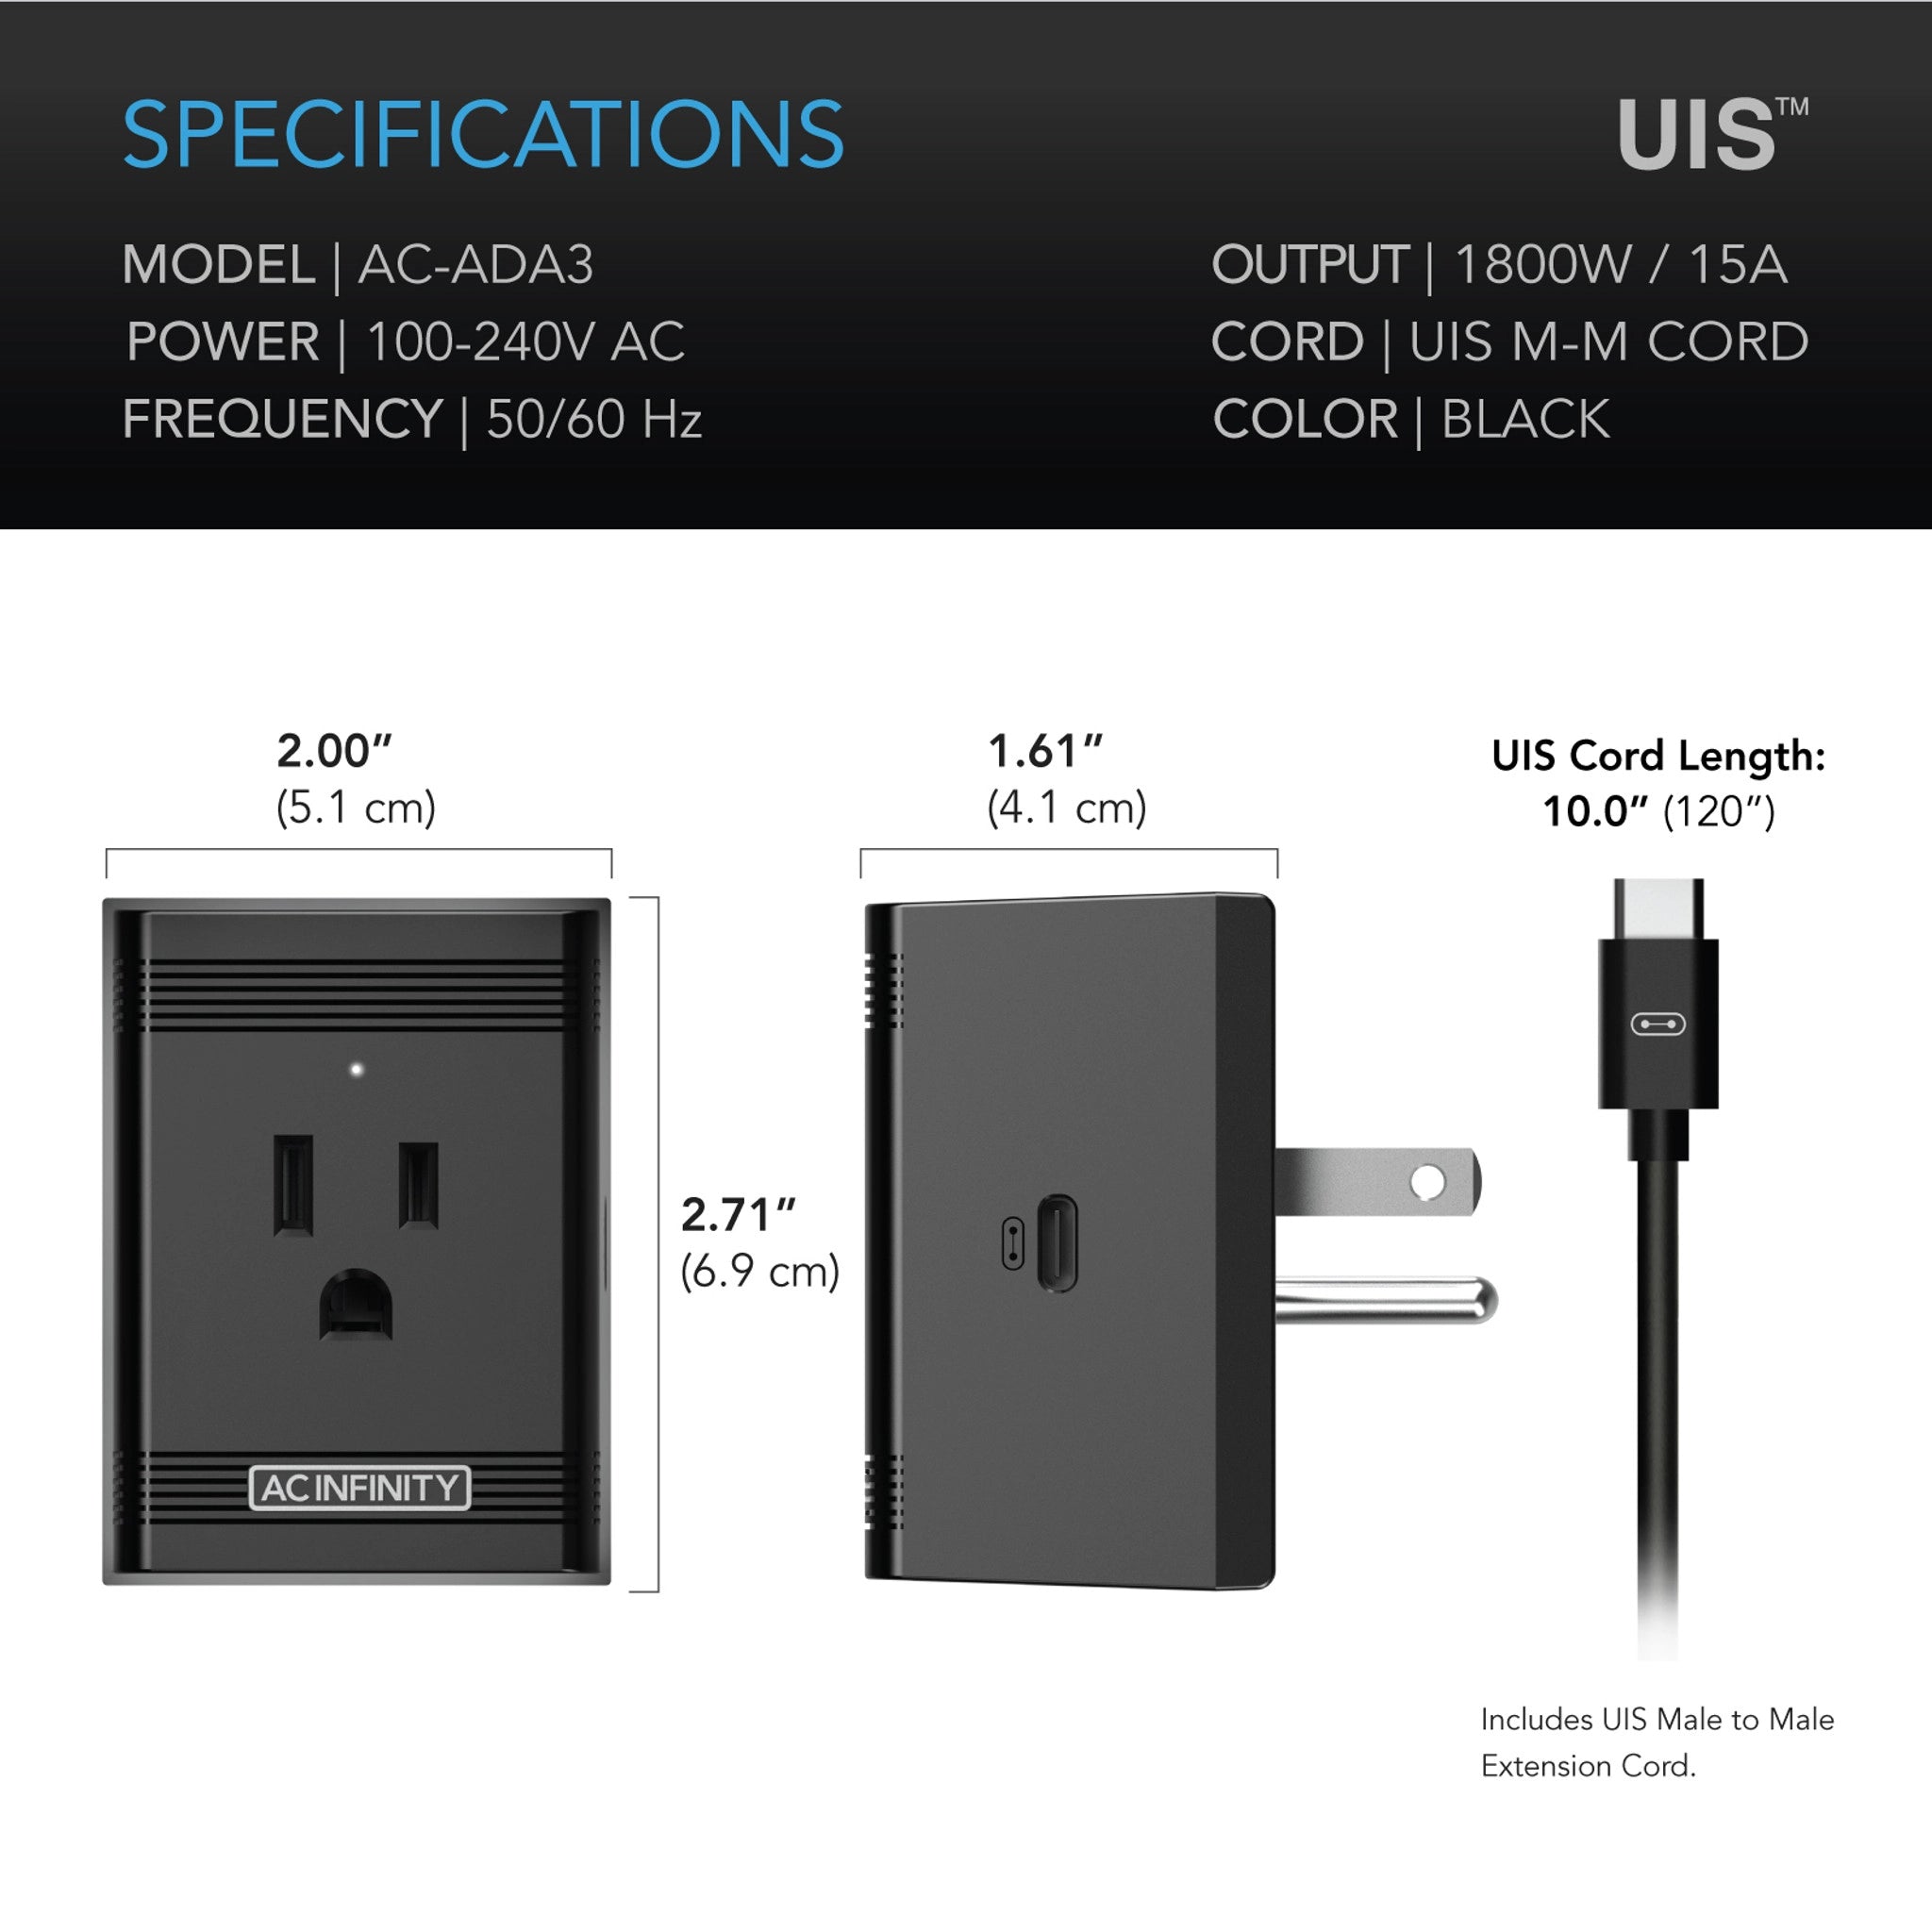 Product Secondary Image:UIS CONTROL PLUG, FOR OUTLET-POWERED EQUIPMENT